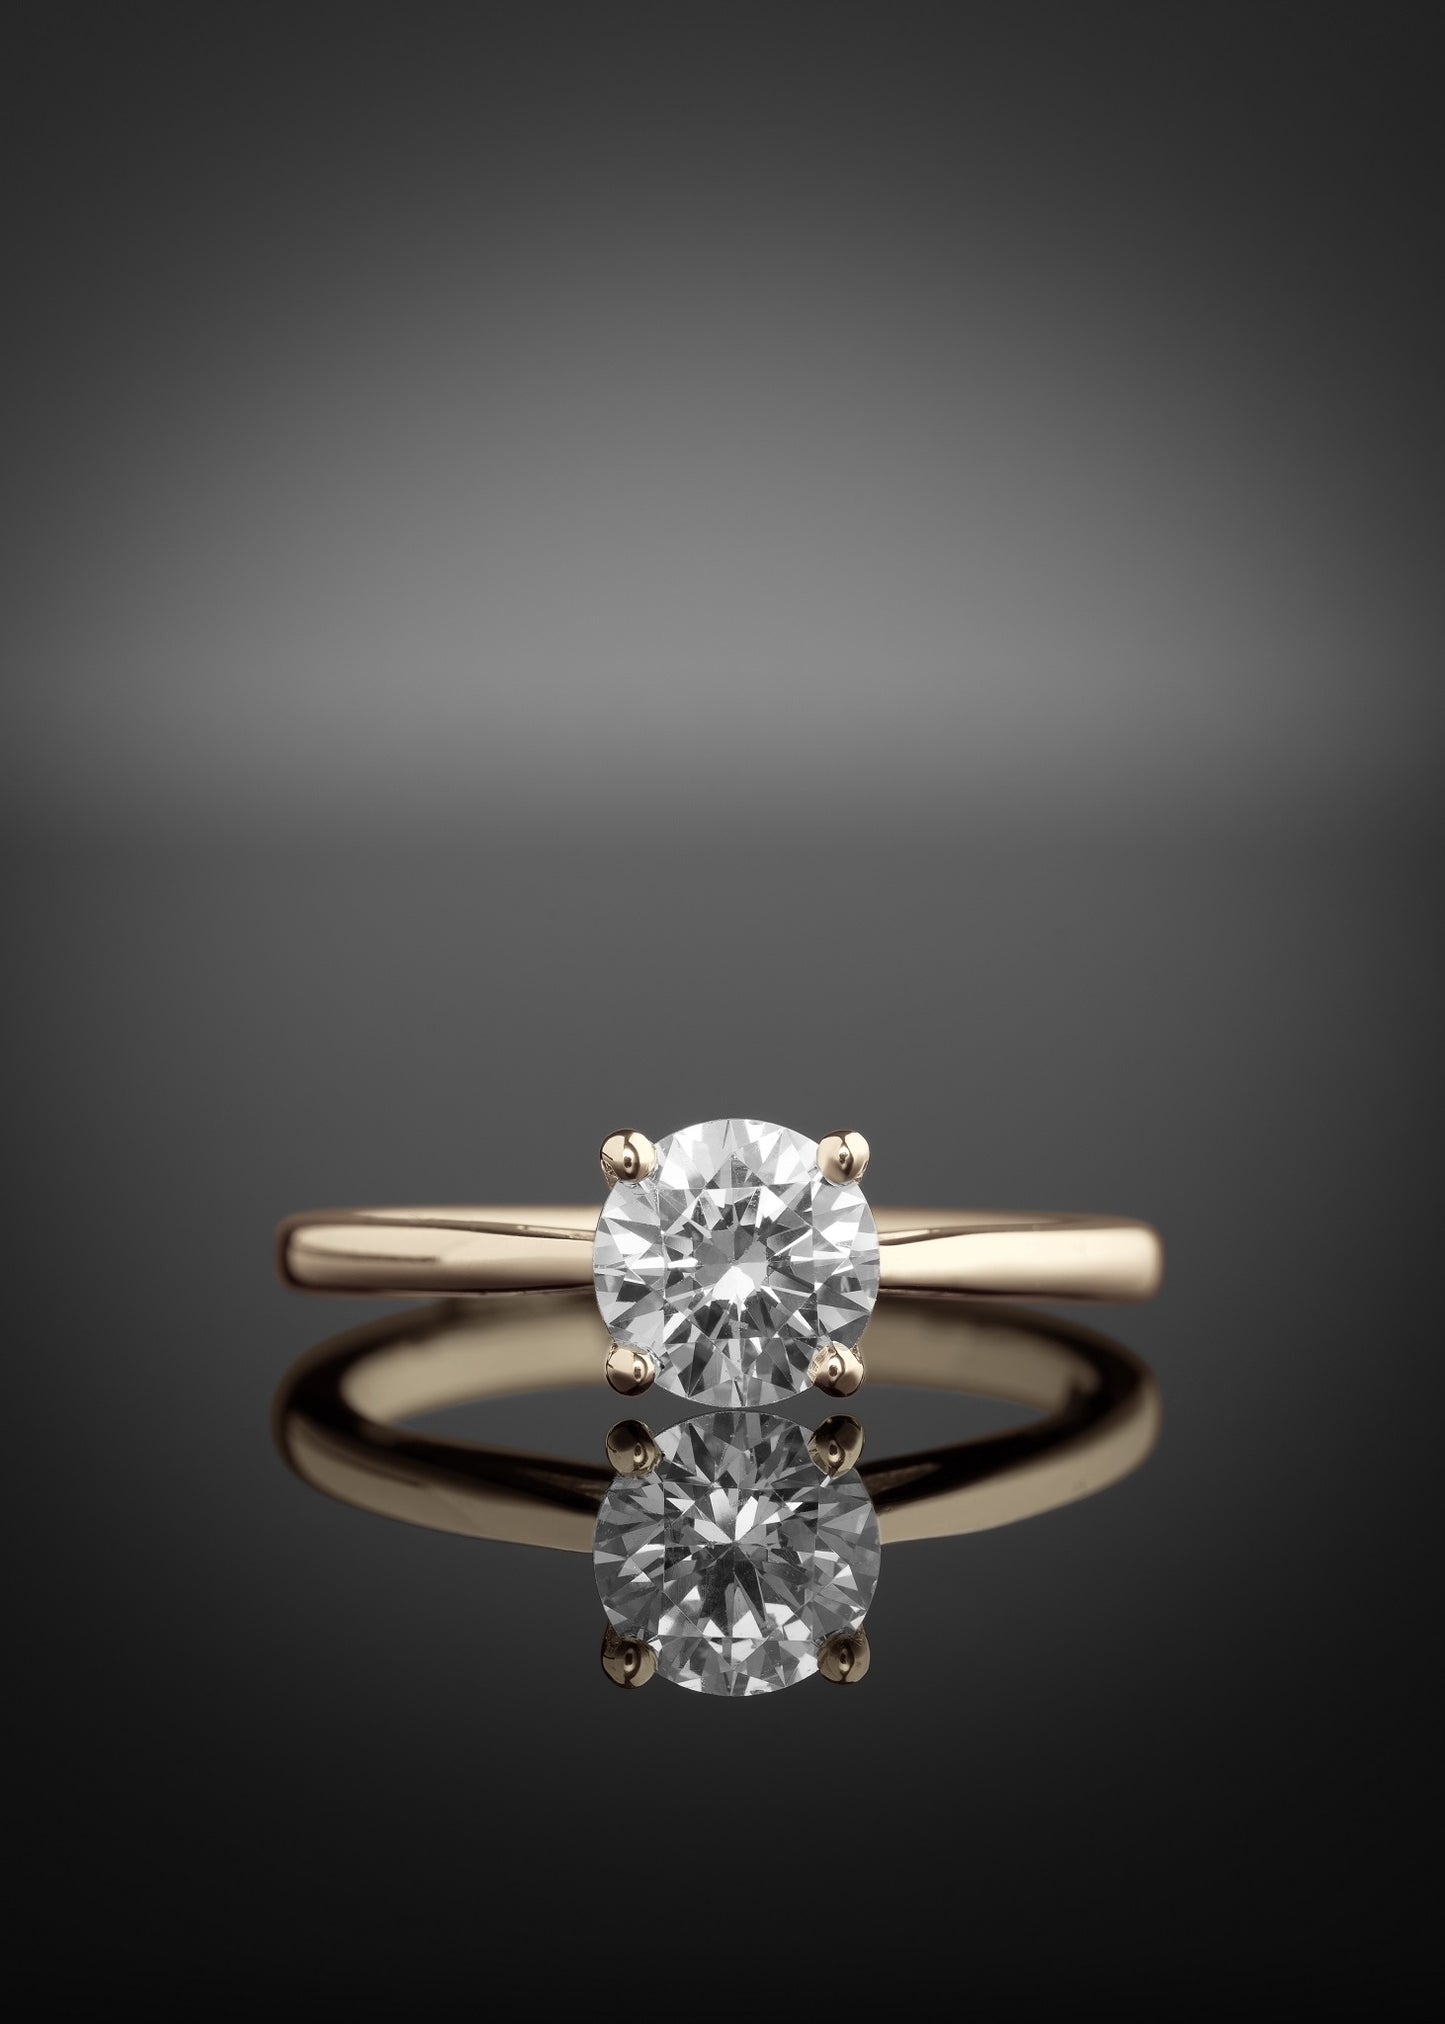 Front view of the solitaire engagement ring with Claddagh setting